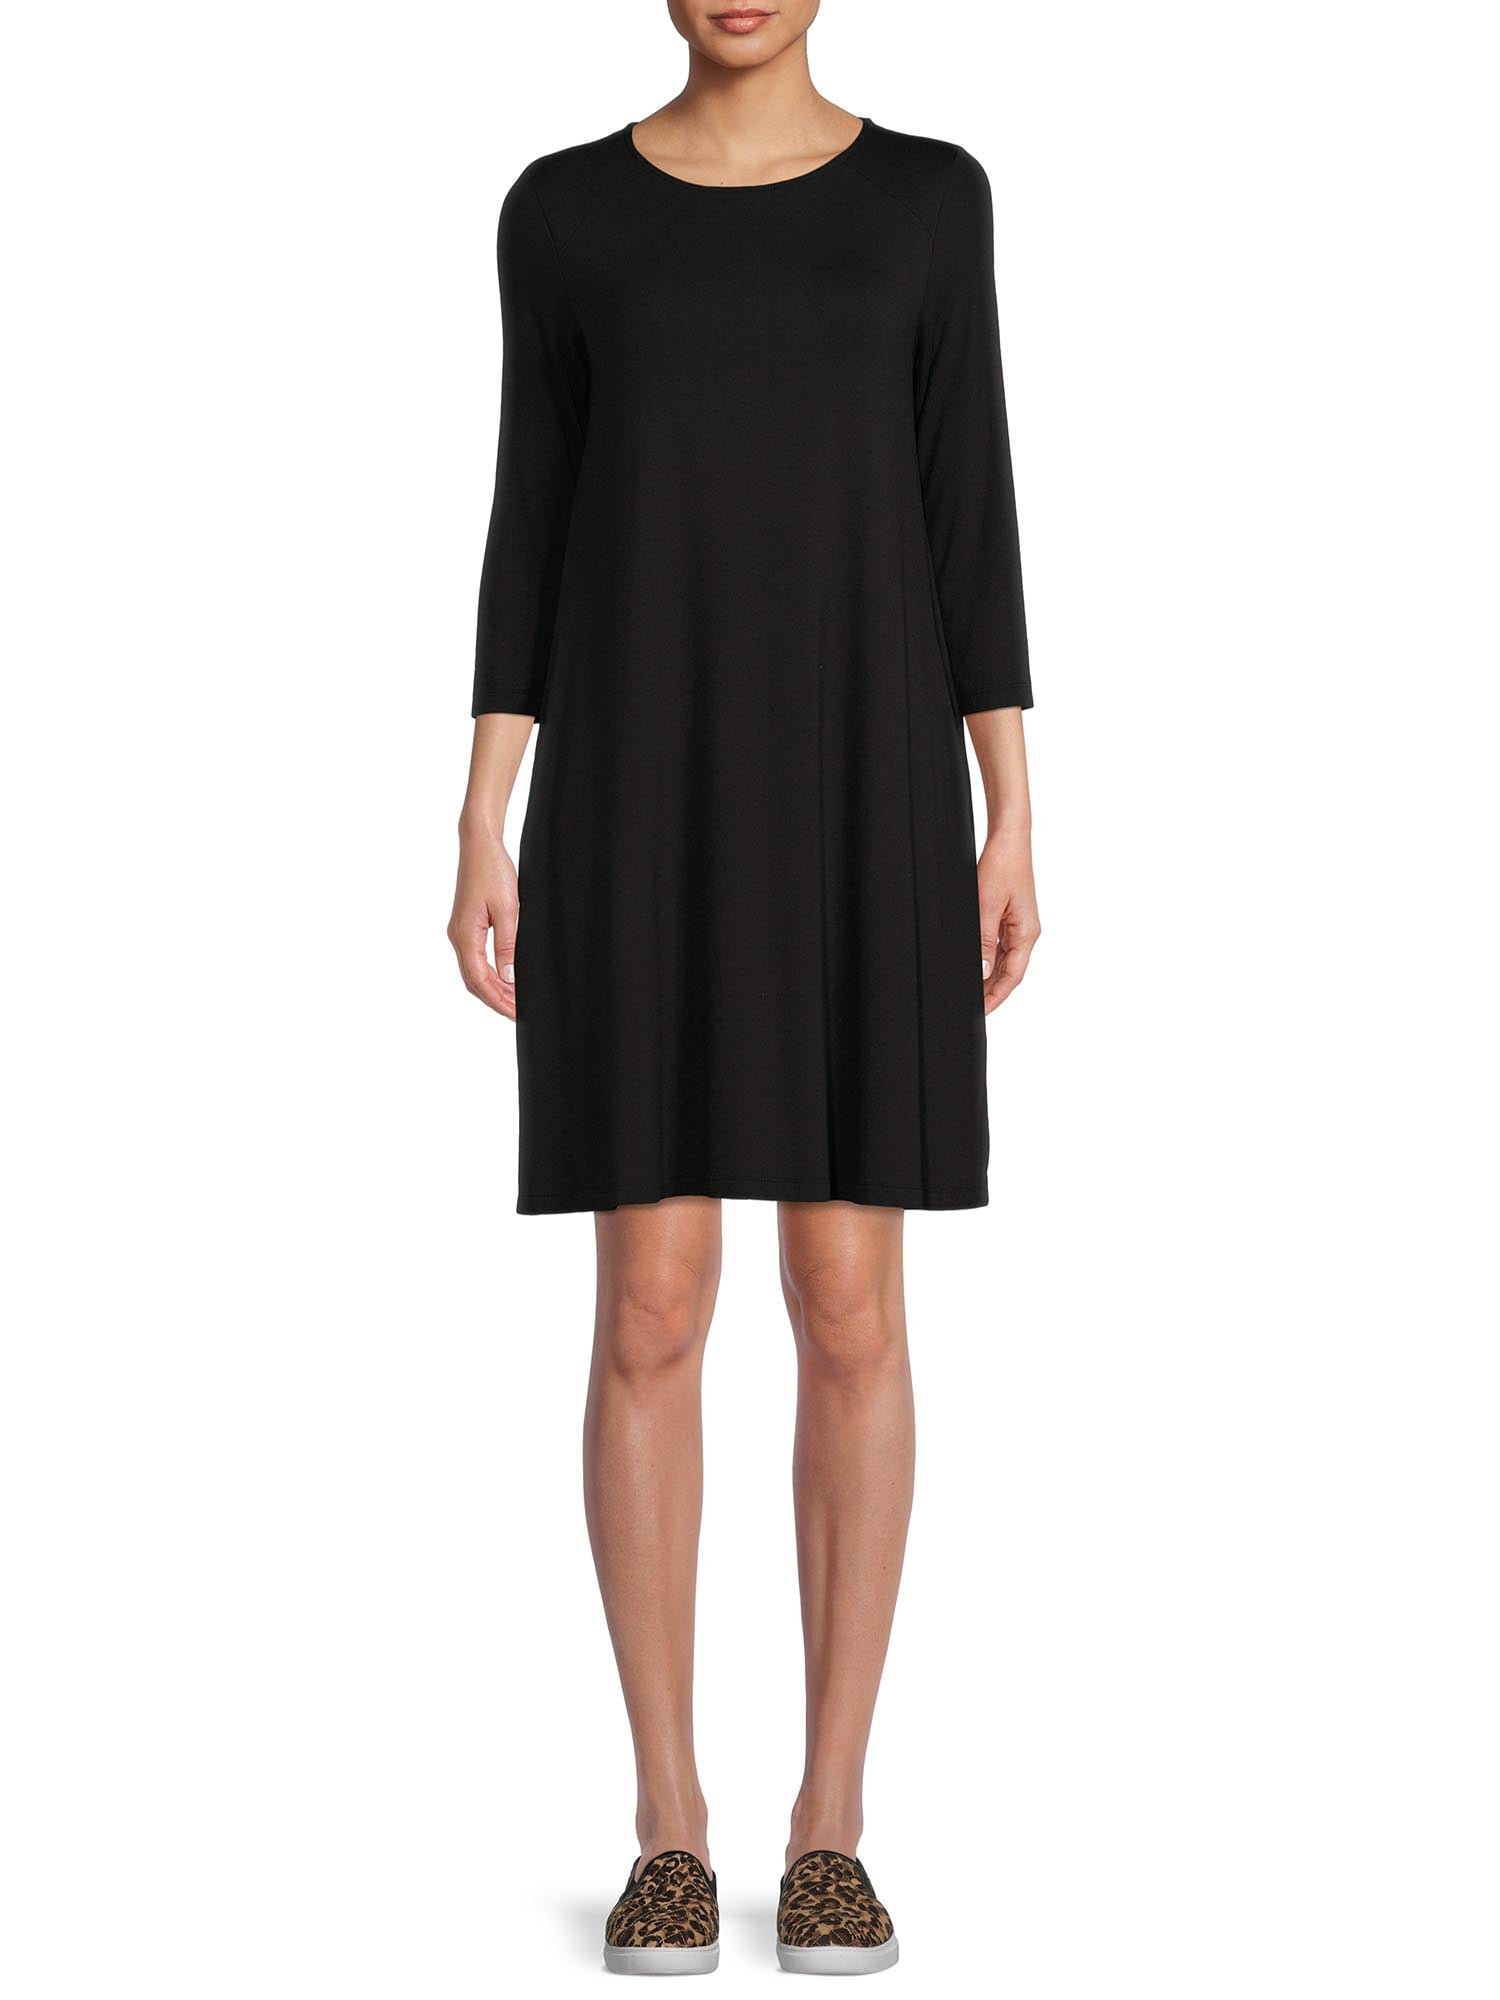 Time and Tru Women's Knit Dress with 3/4-Length Sleeves - Walmart.com